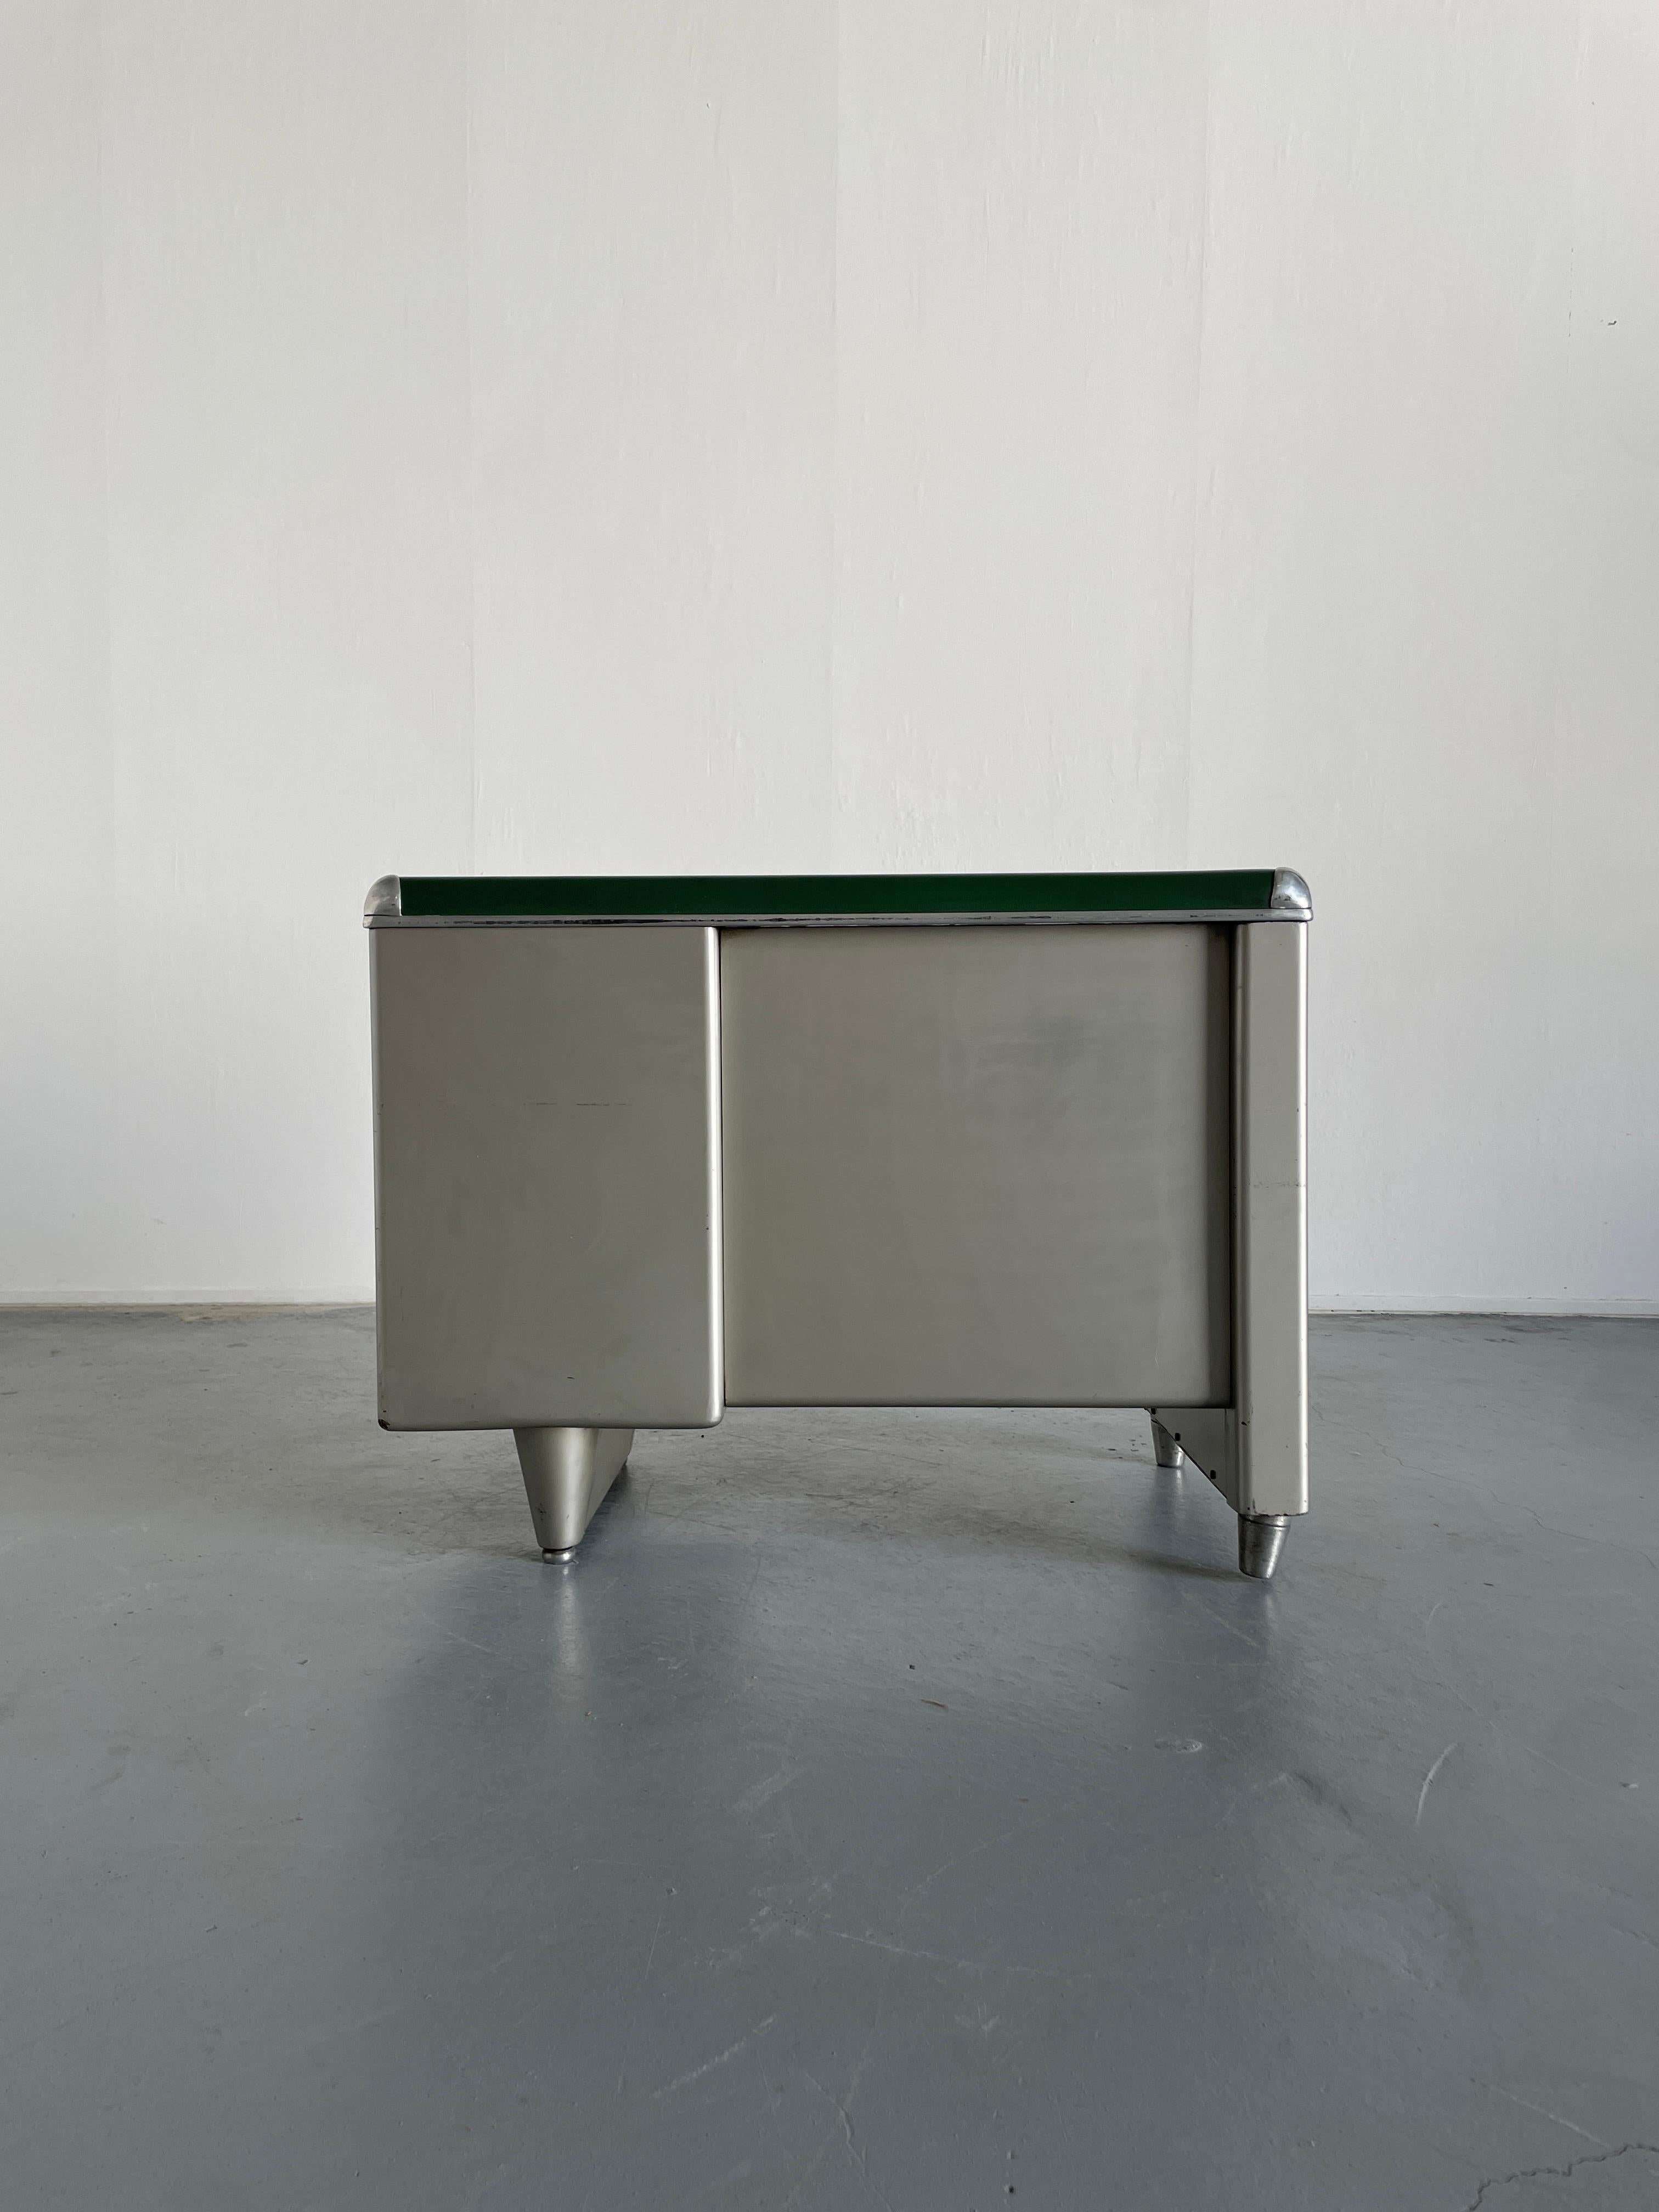 Mid-20th Century 1950s Industrial Single Bank Steel Tanker Desk by Orma Milano, Italy